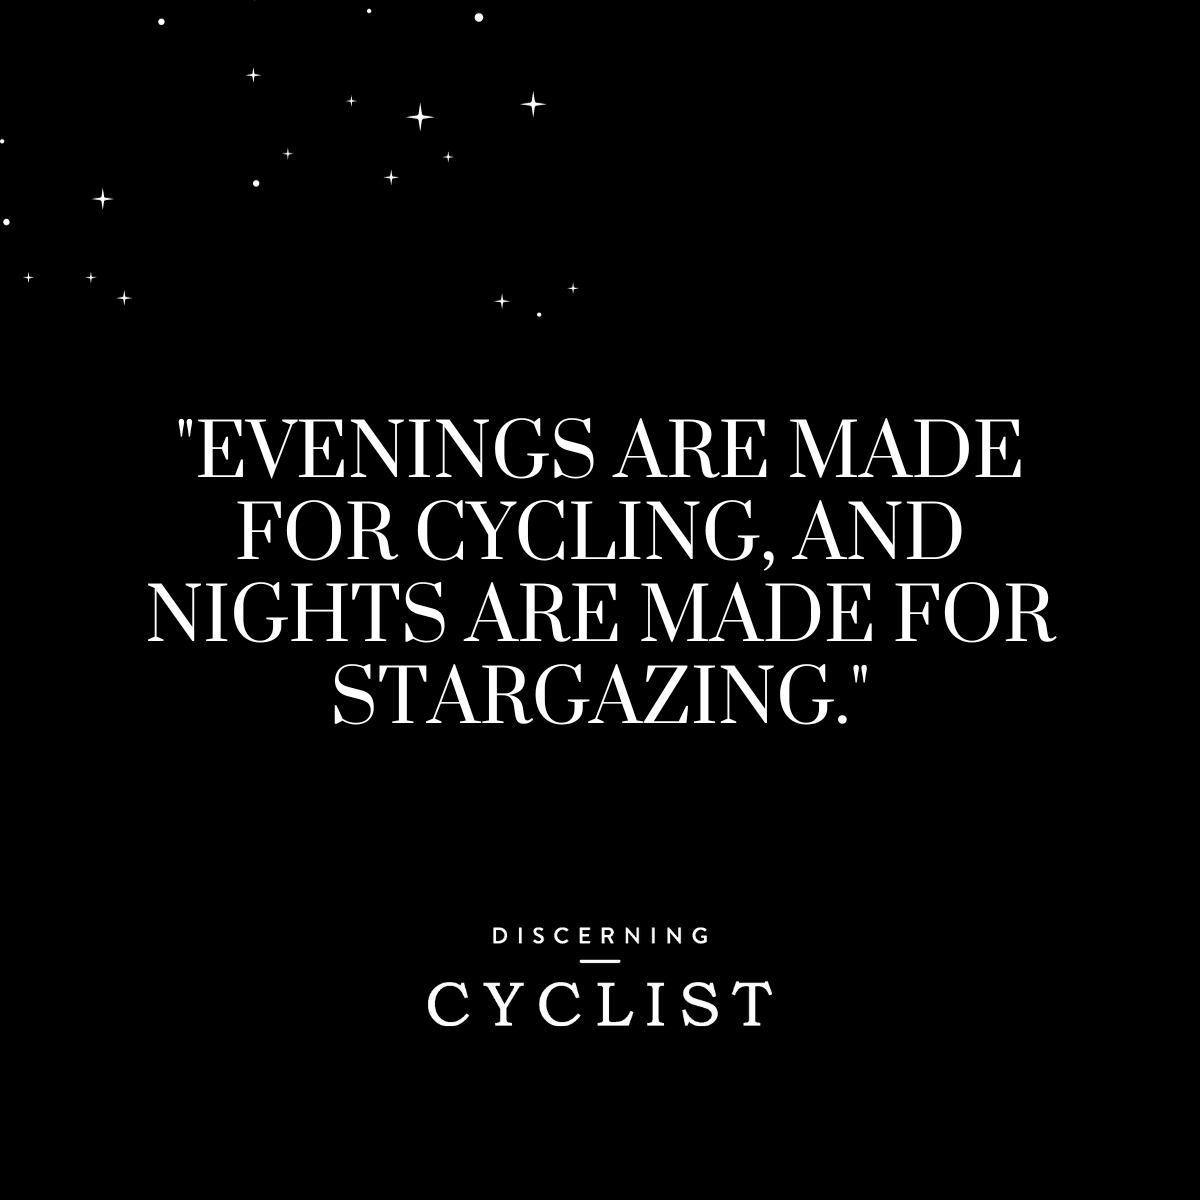 "Evenings are made for cycling, and nights are made for stargazing."